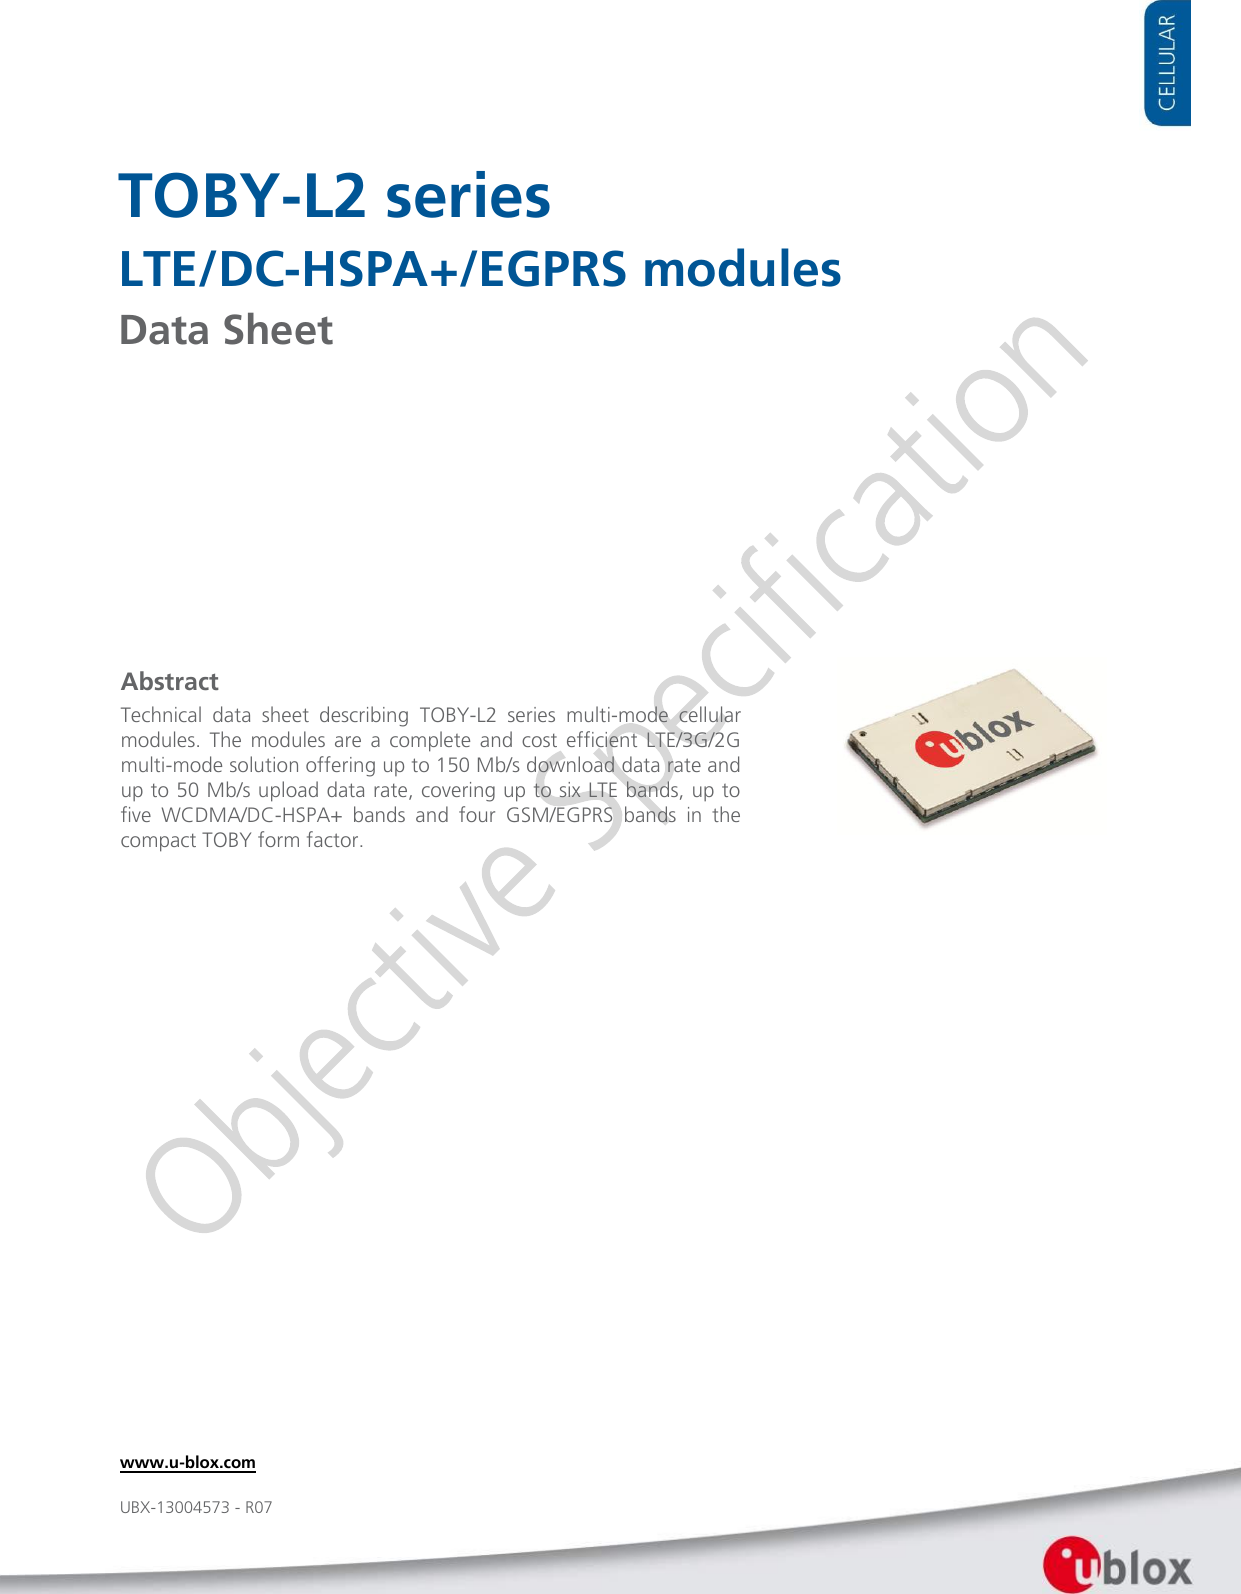     TOBY-L2 series LTE/DC-HSPA+/EGPRS modules Data Sheet             Abstract Technical  data  sheet  describing  TOBY-L2  series  multi-mode  cellular modules.  The  modules  are  a  complete  and  cost  efficient  LTE/3G/2G multi-mode solution offering up to 150 Mb/s download data rate and up to 50 Mb/s upload data rate, covering up to six LTE bands, up to  five  WCDMA/DC-HSPA+  bands  and  four  GSM/EGPRS  bands  in  the compact TOBY form factor. www.u-blox.com UBX-13004573 - R07 